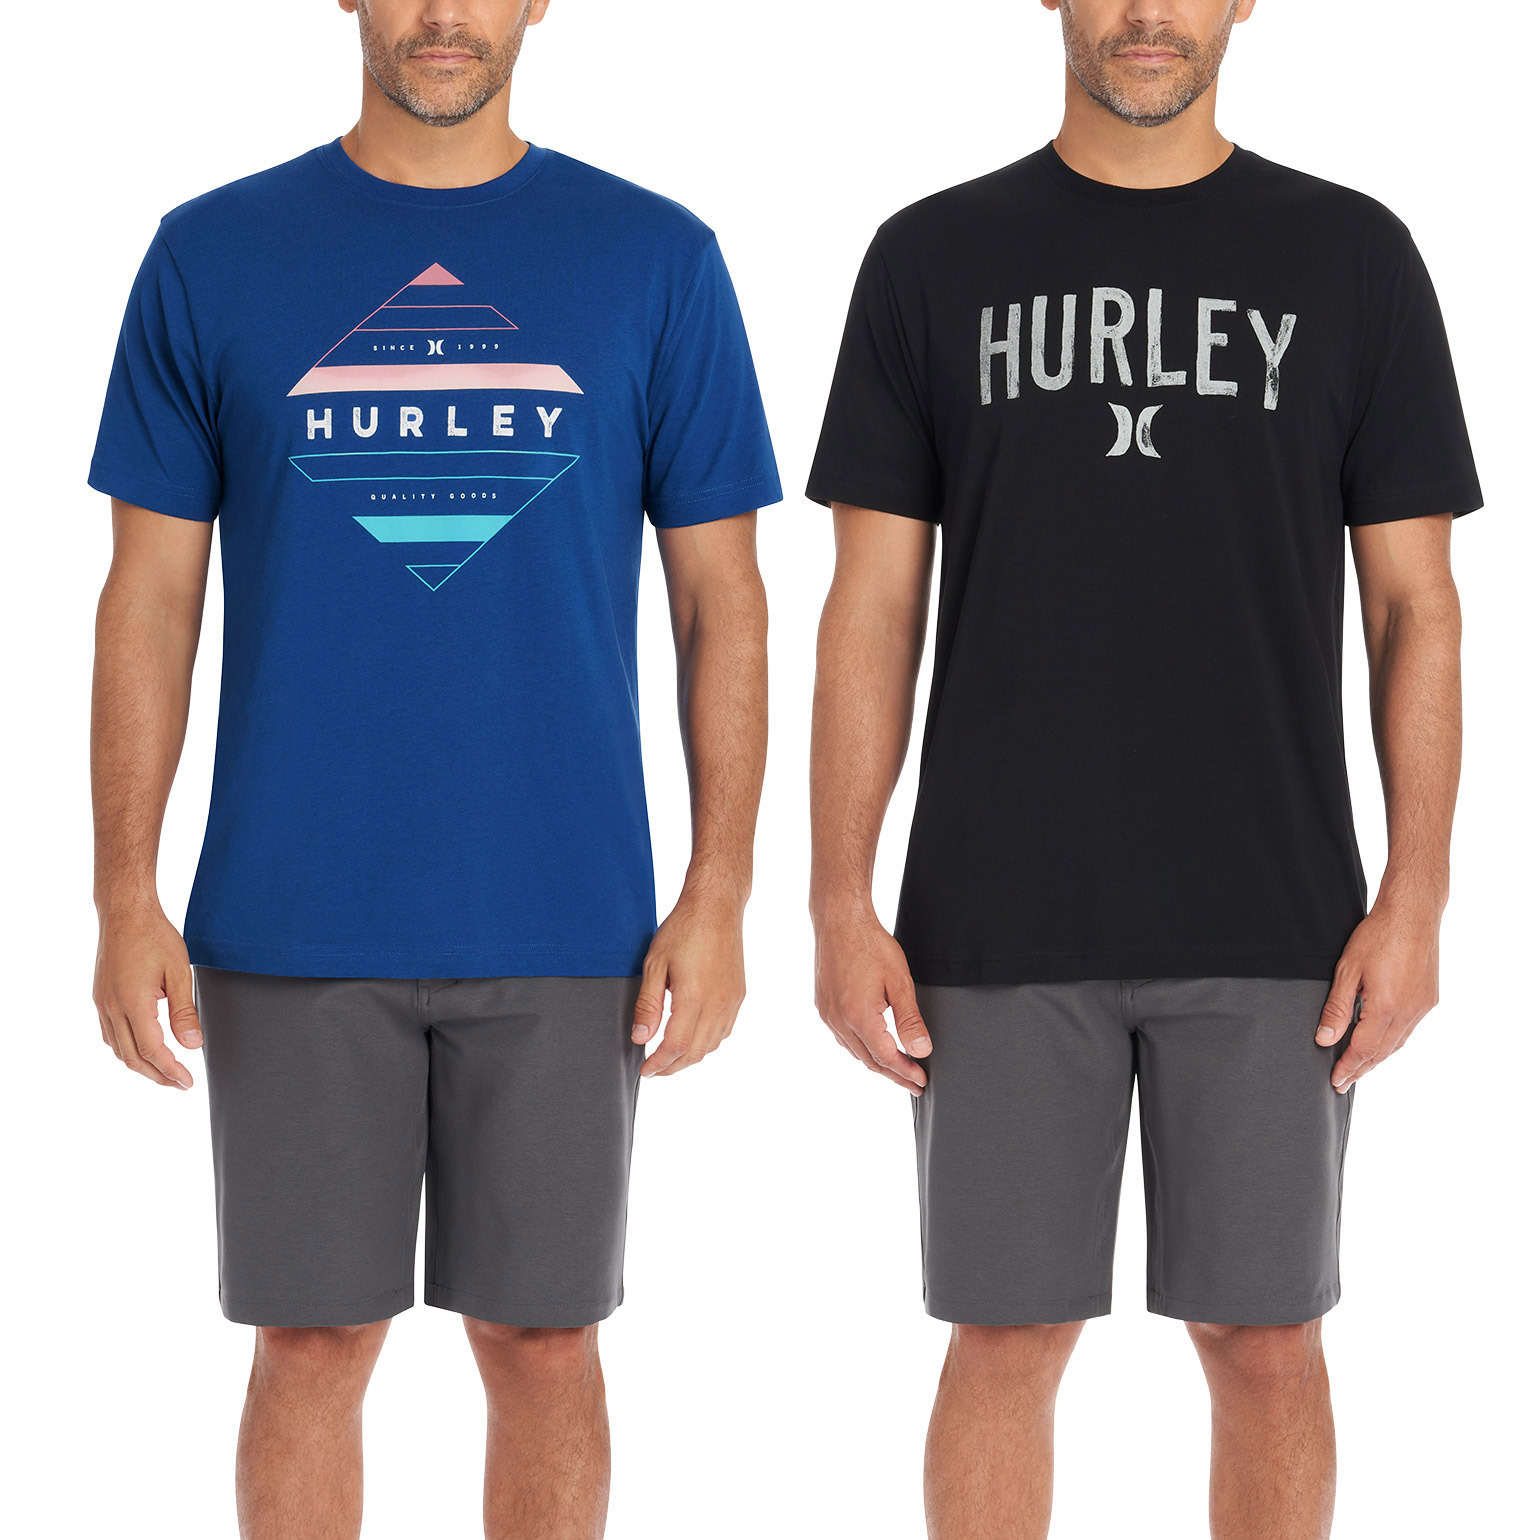 Hurley Men's Graphic Tee, 2-Pack Classic Fit Smooth Touch Prints